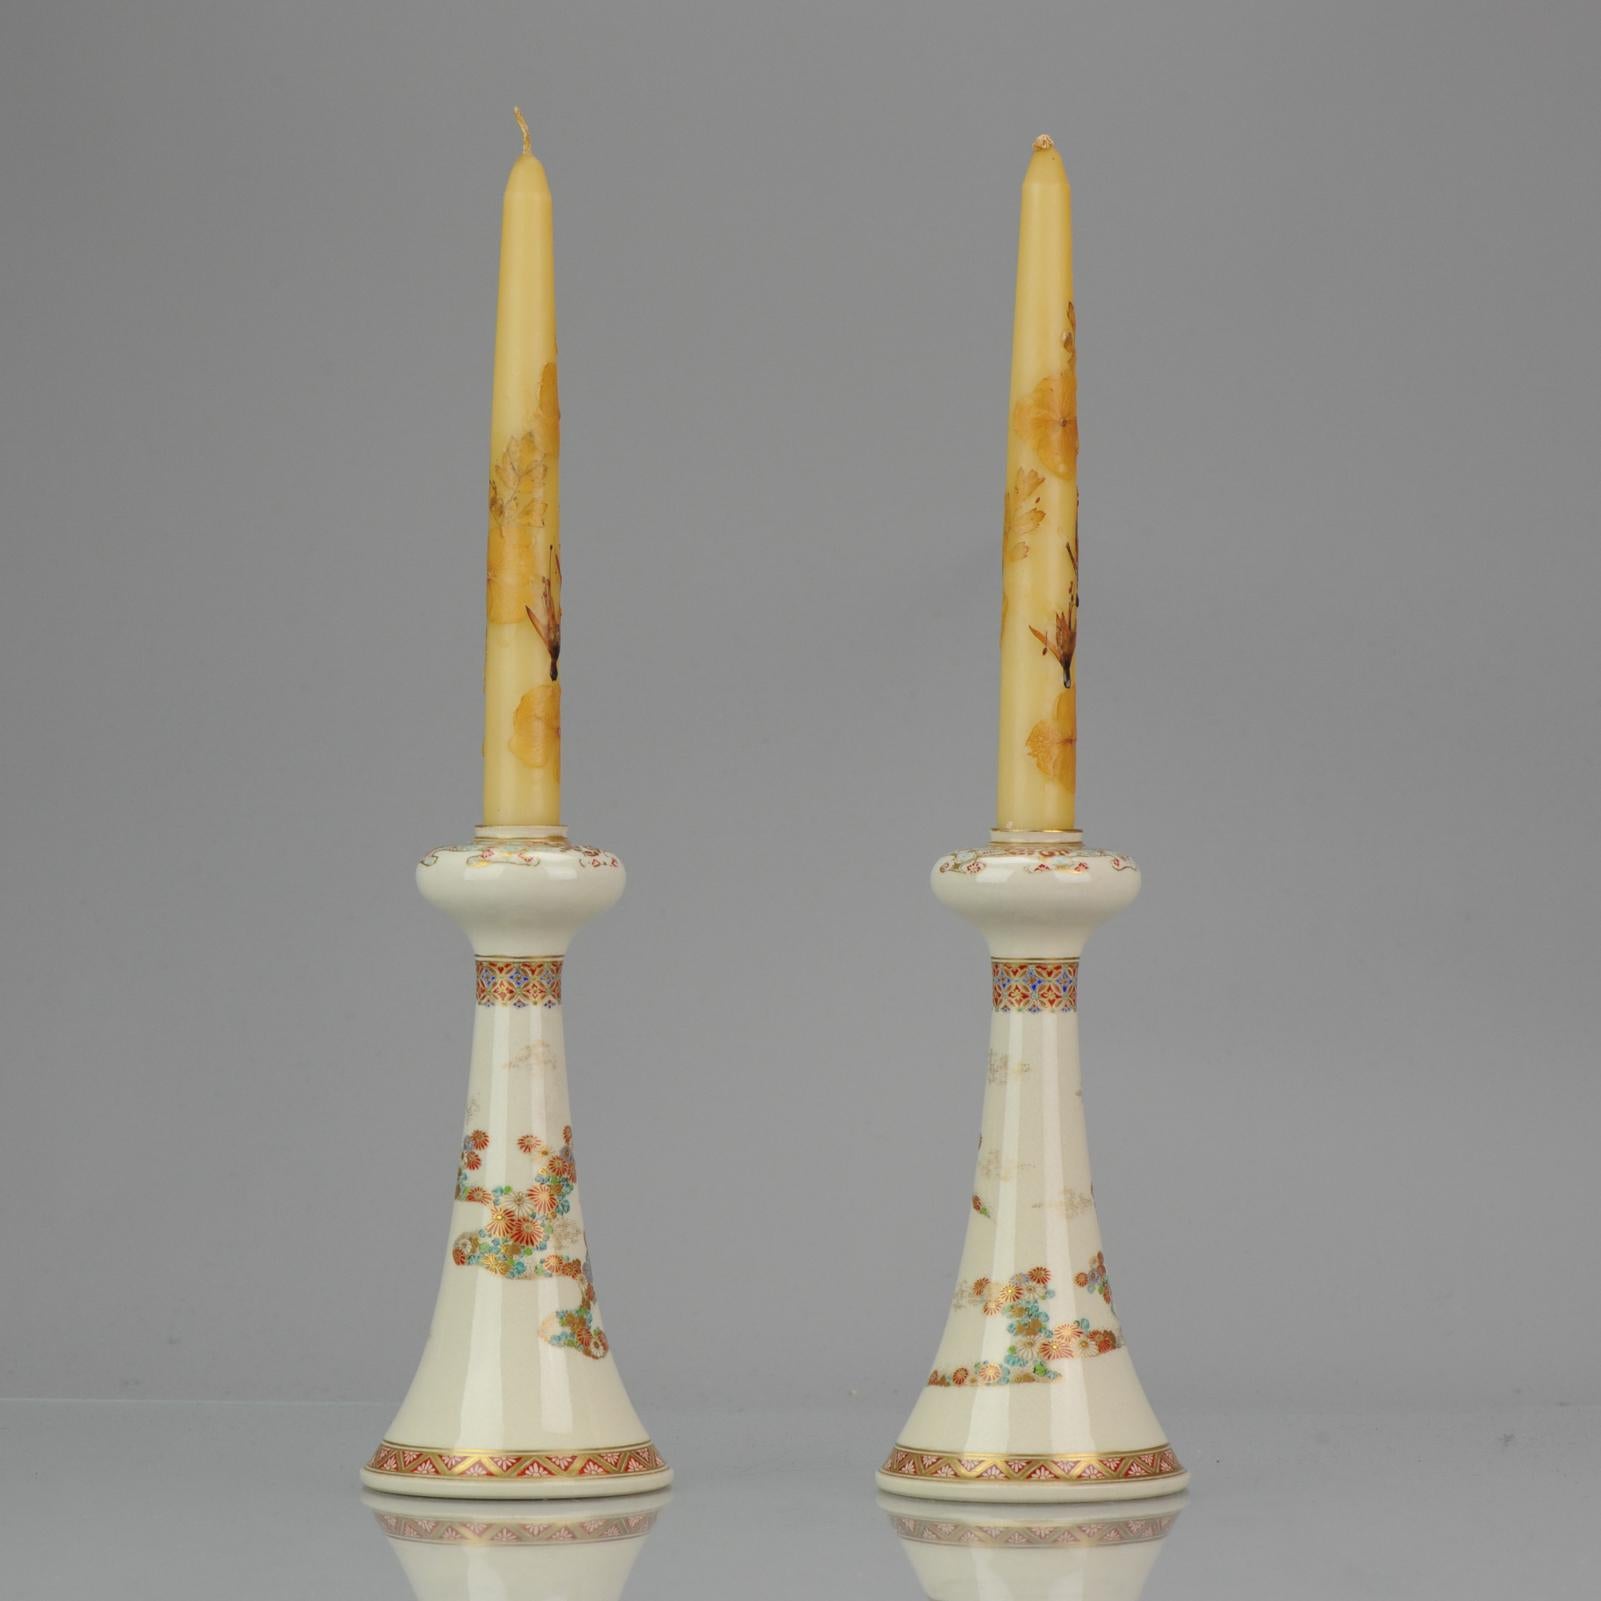 Antique ca 1900 Japanese Satsuma Obiyama Candle Holders Richly Decorated Marked In Excellent Condition For Sale In Amsterdam, Noord Holland